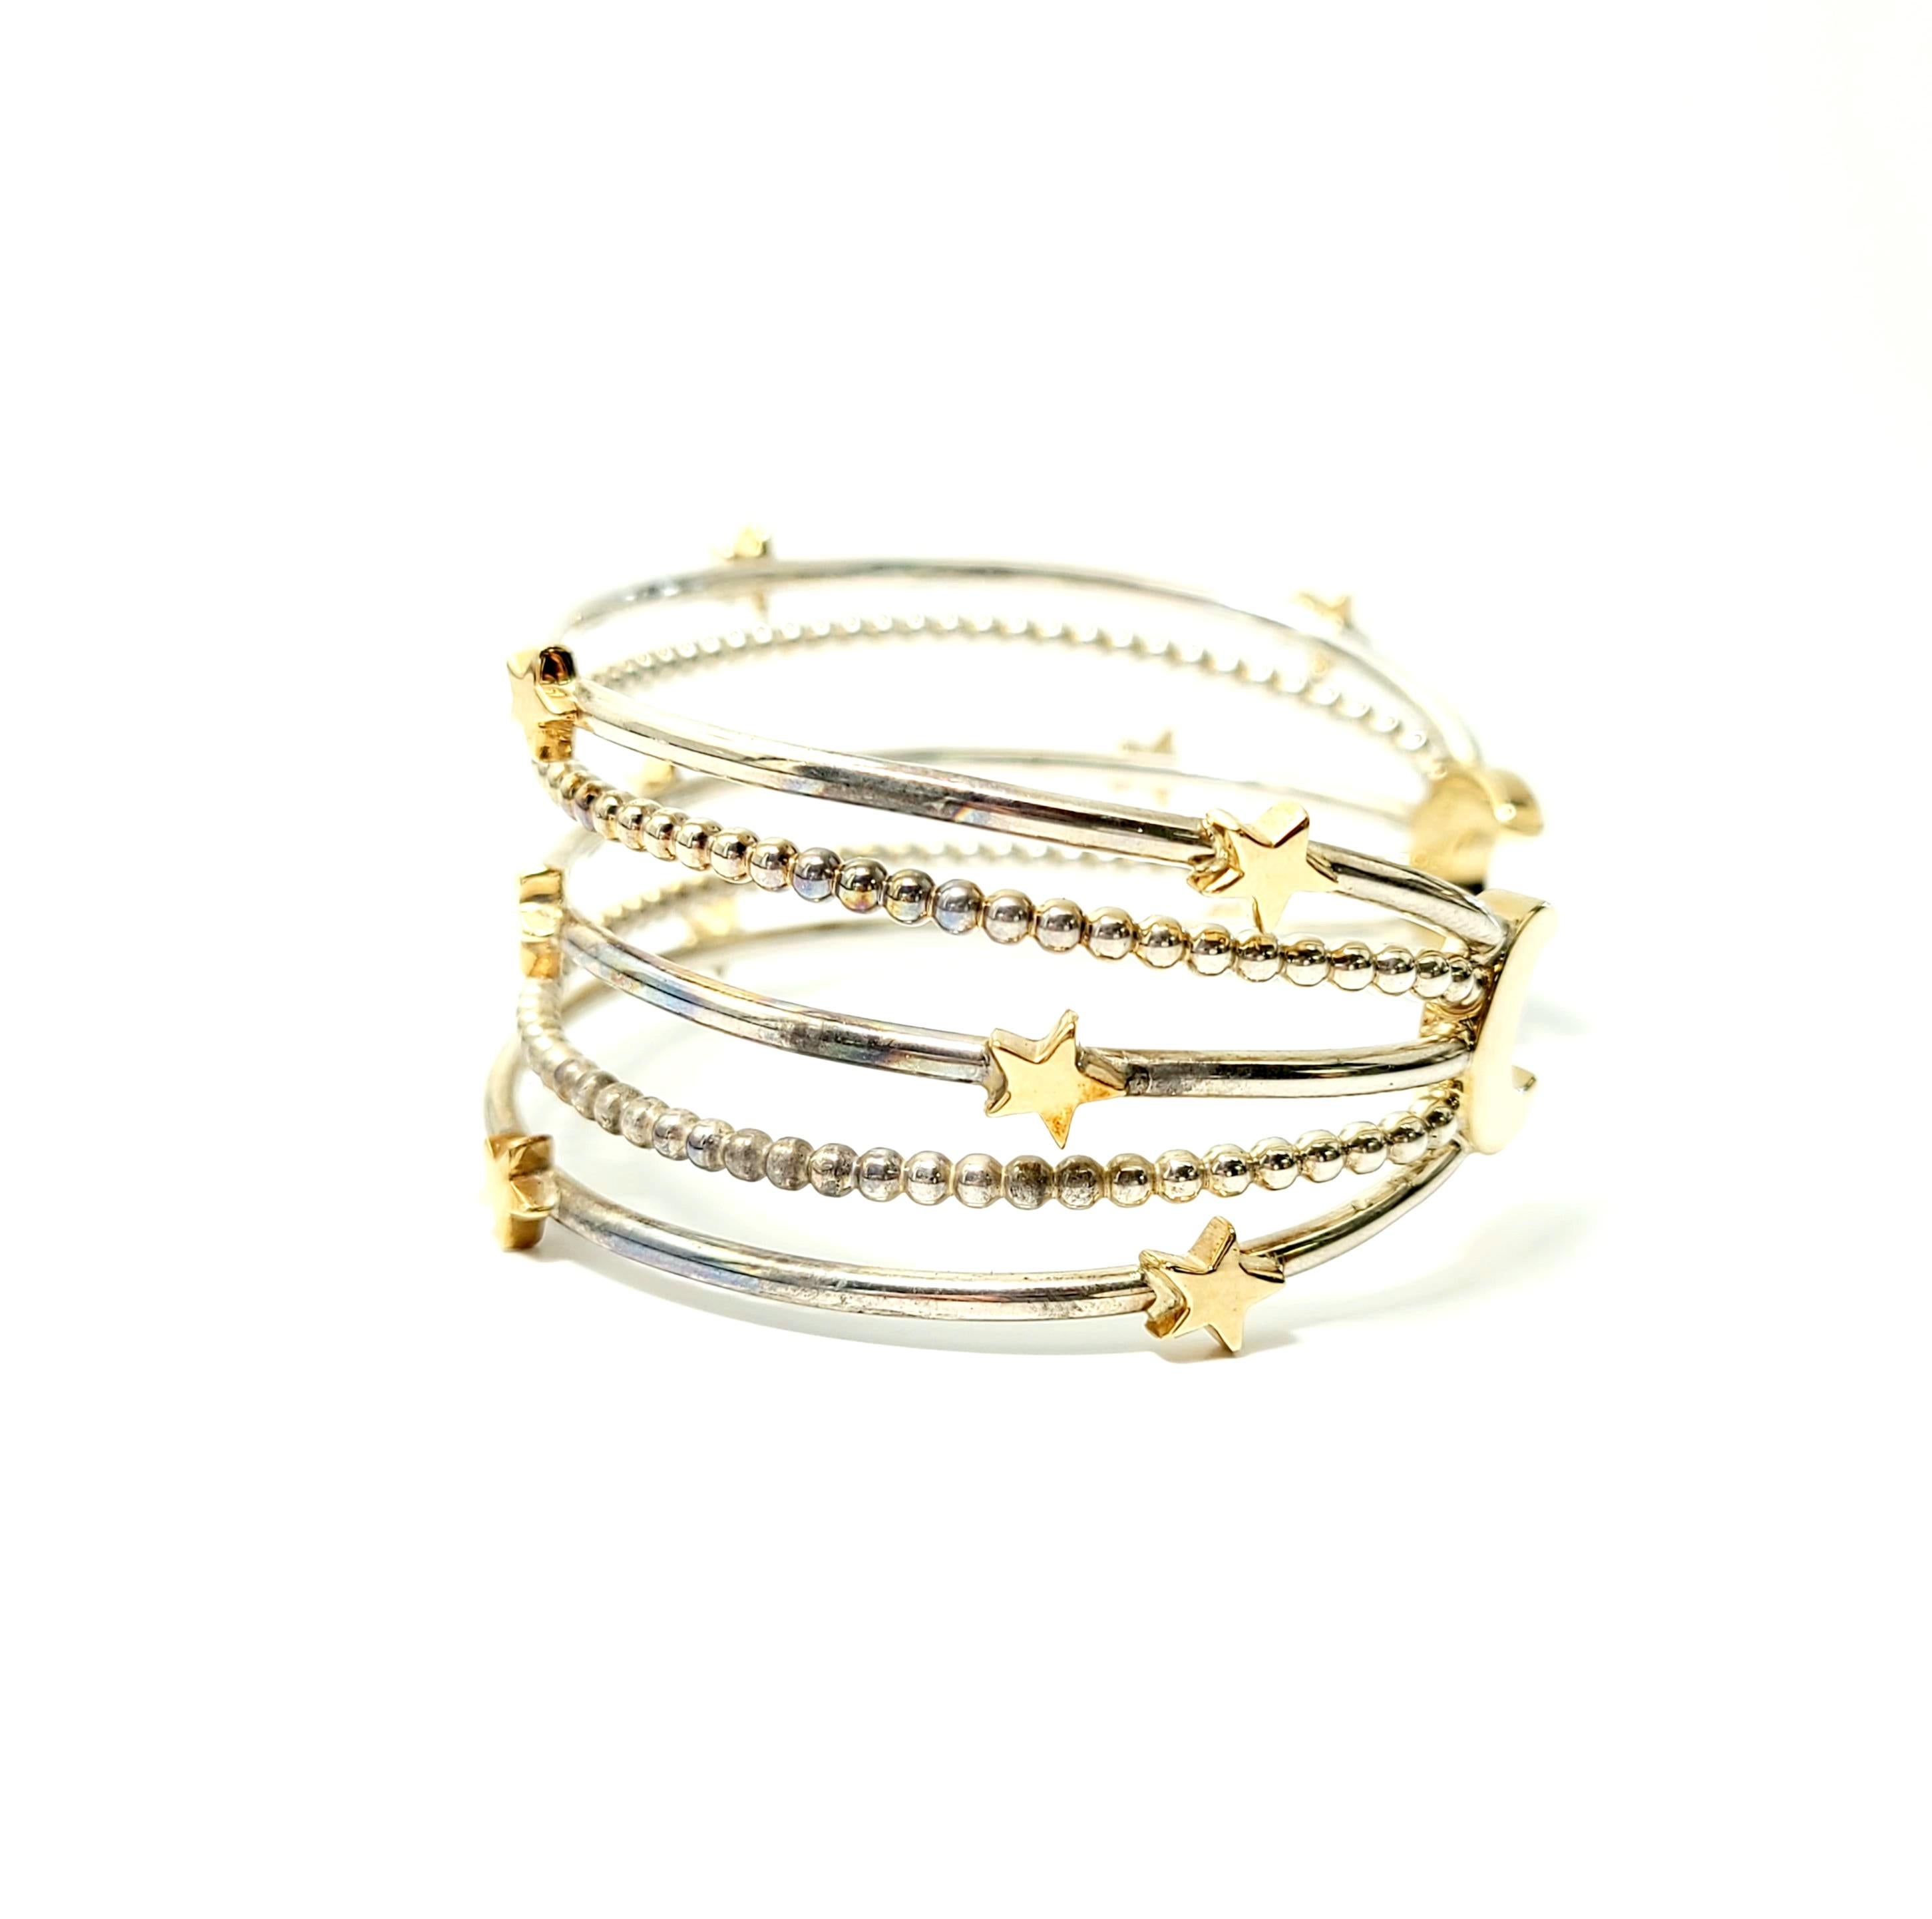 Sterling silver and 14K yellow gold Crescent moon and stars cuff bracelet by Mignon Faget,

Mignon Faget is well known and highly sought after. This piece is part of the Crescent Collection which draws inspiration from the New Orleans water tower